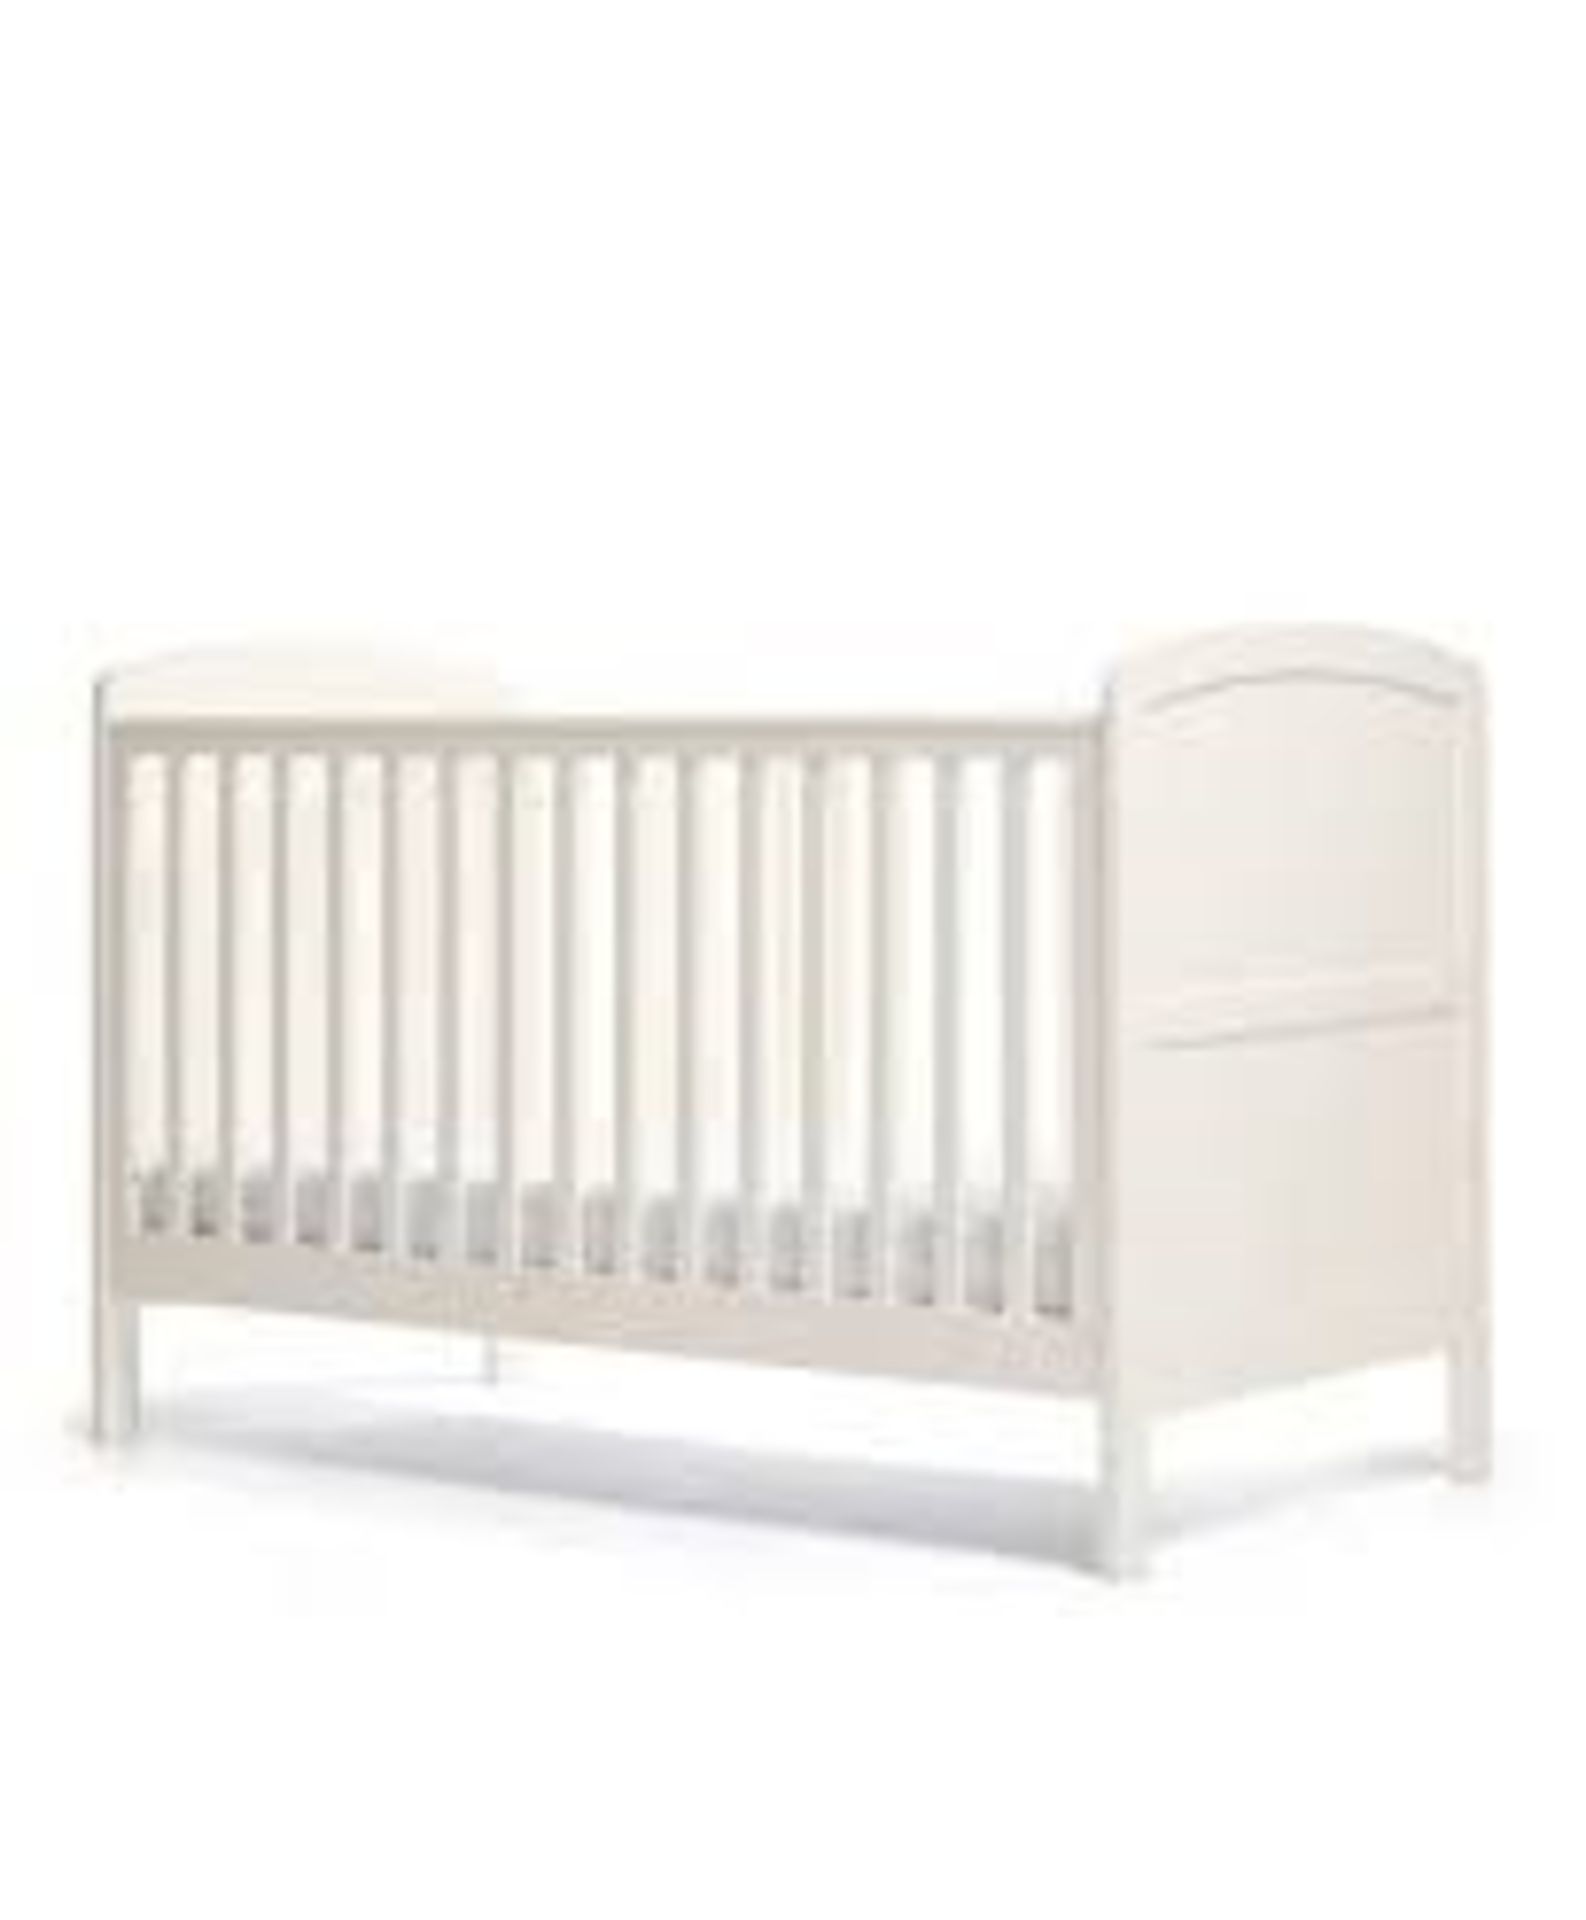 Boxed 140cm x 70cm Cot Bed RRP £120 (Pictures Are